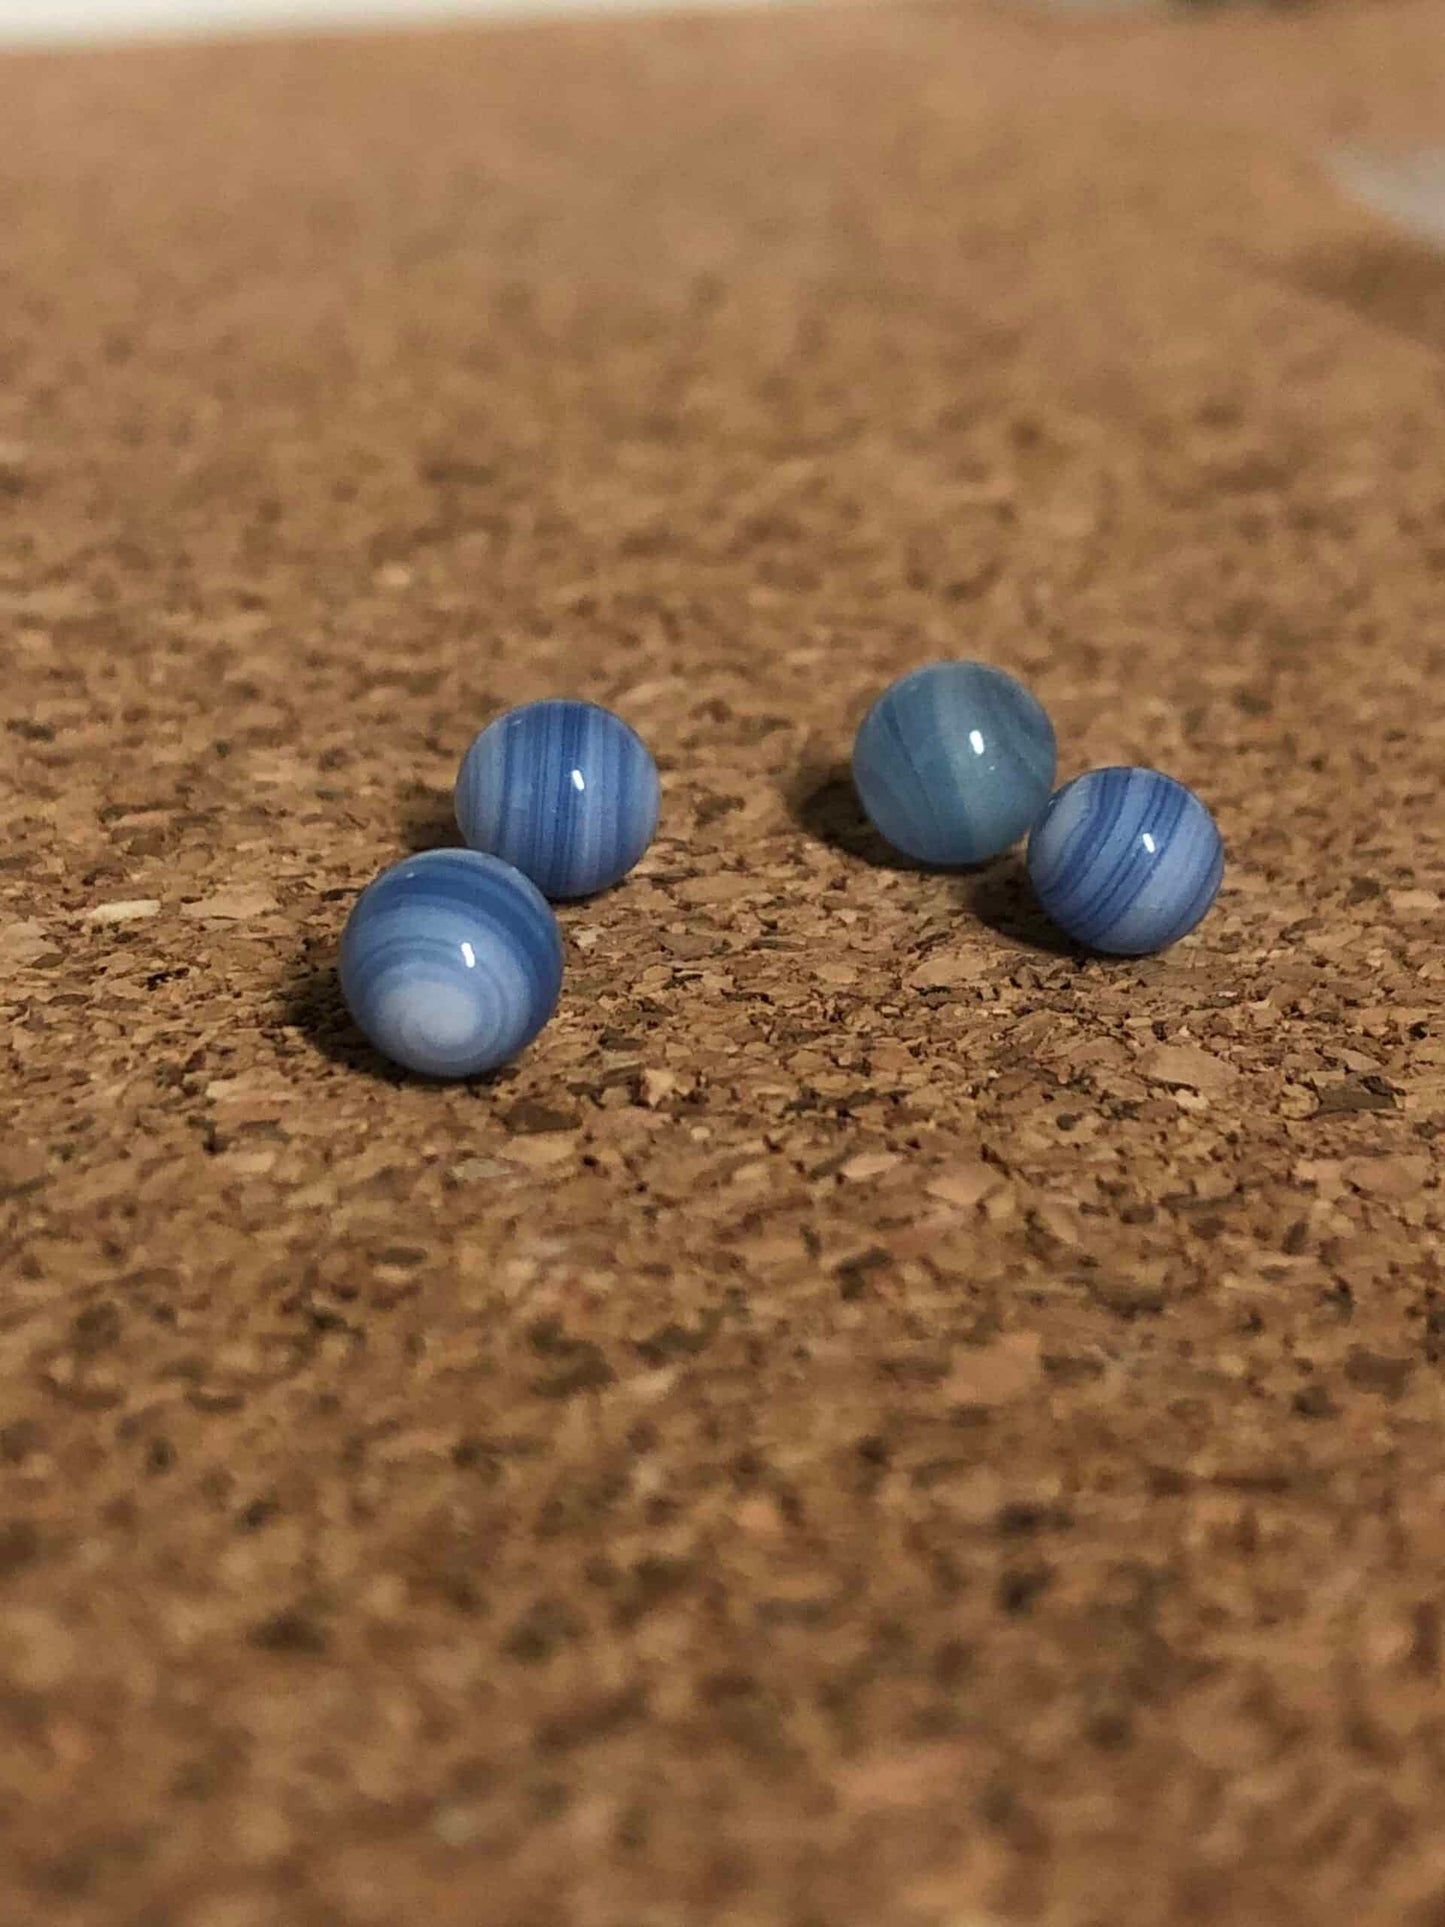 meticulously crafted art piece - 6mm Blue Terp Pearl by Gnarla Carla